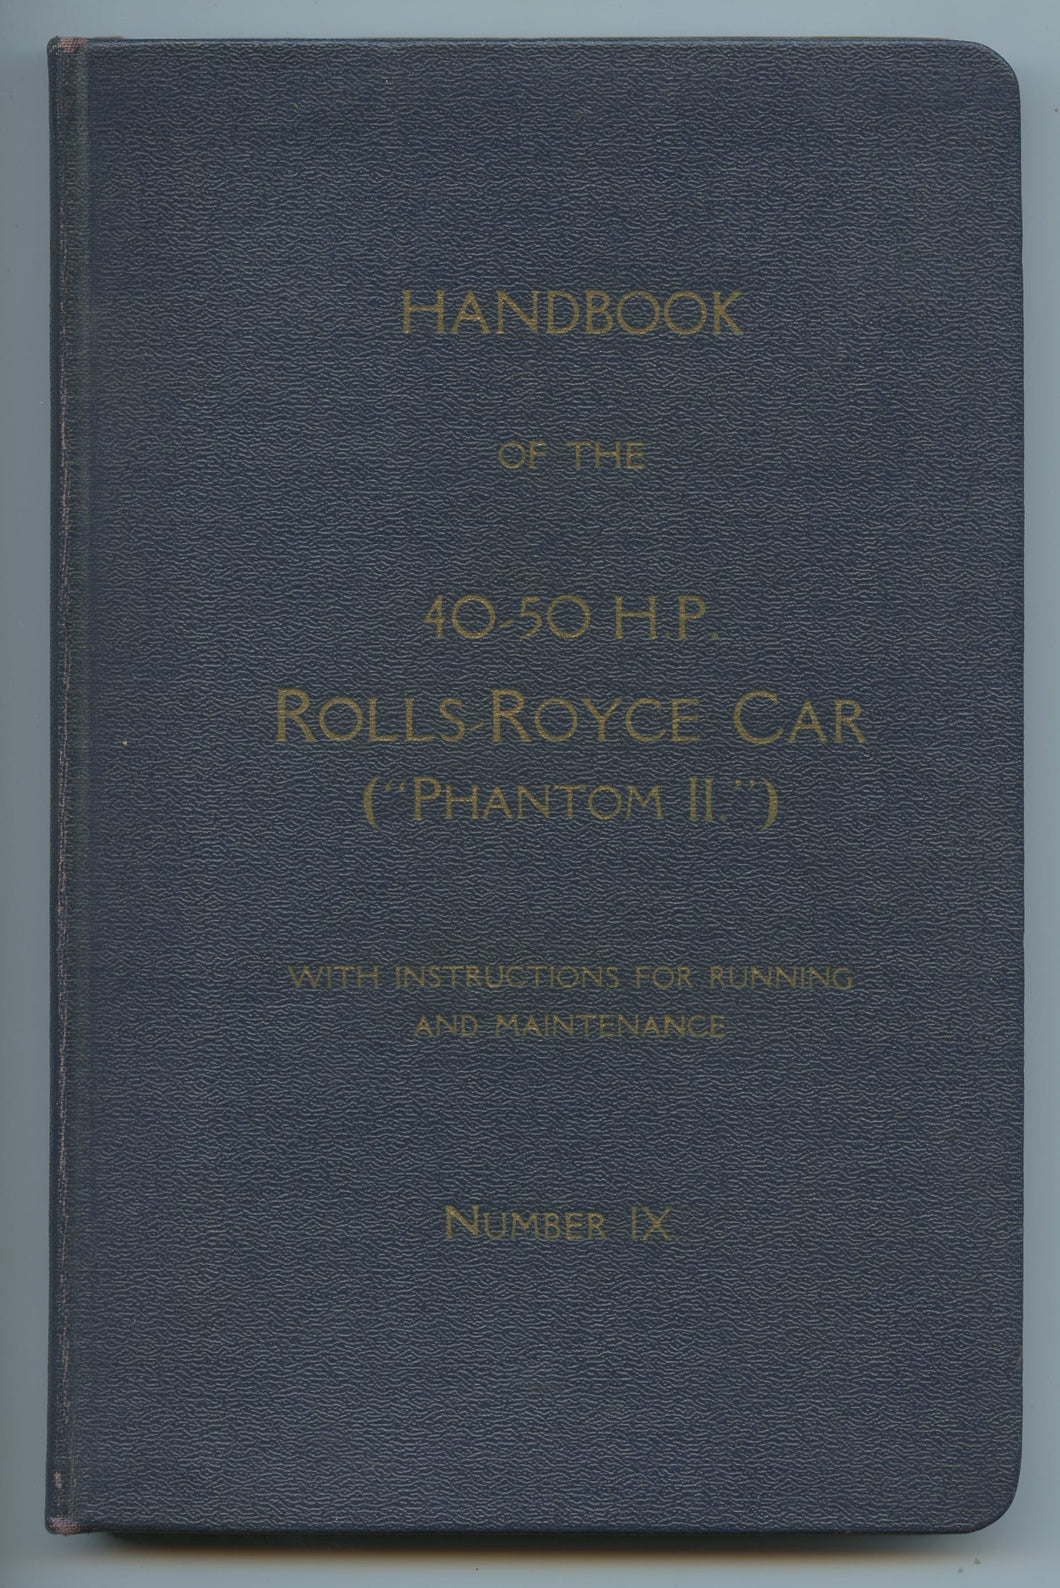 Handbook of the 40-50 HP Rolls-Royce Car ("Phantom II") with Instructions for Running and Maintenance. Number IX